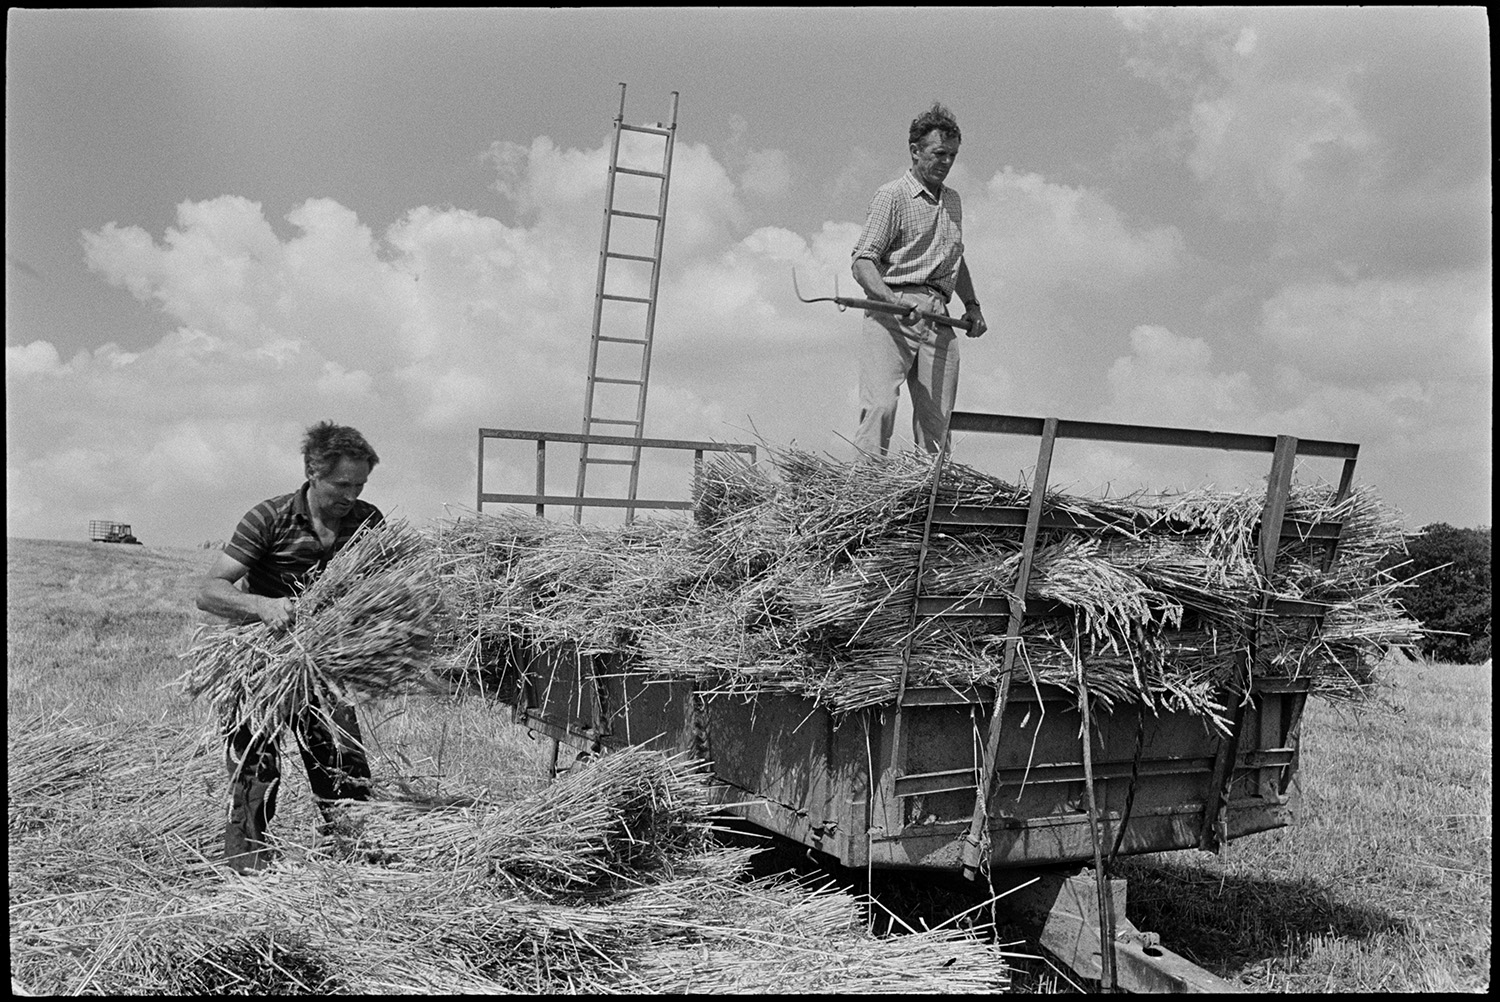 Men building wheatrick in harvest field.
[Men, possibly from the Cole family, unloading corn or wheat with a pitchfork, from a trailer, to build a wheatrick in a field at Ashreigney. A ladder is resting against the trailer.]